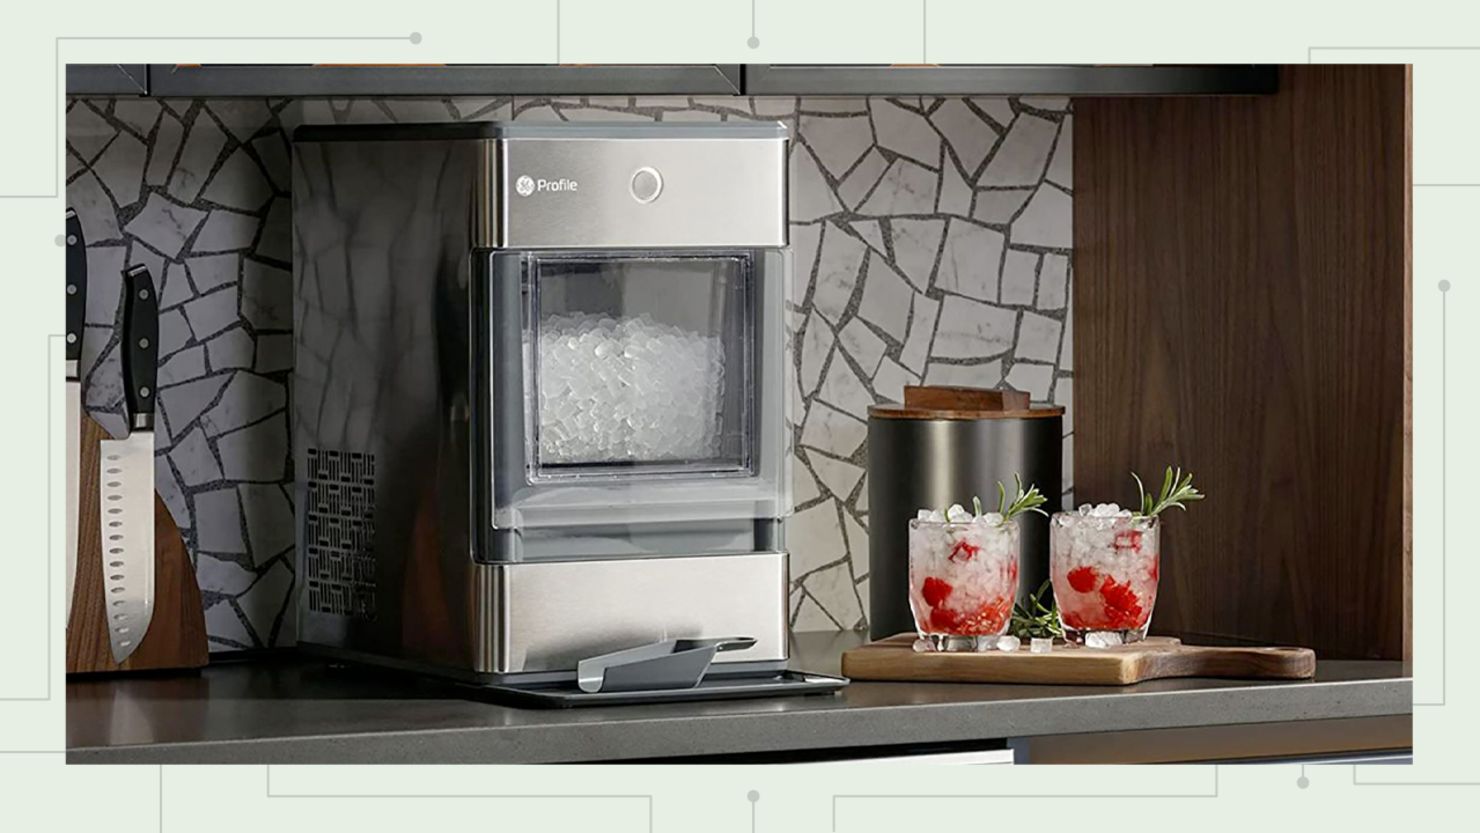 Nugget Countertop Ice Maker, Chewable Pellet Ice Machine with Self